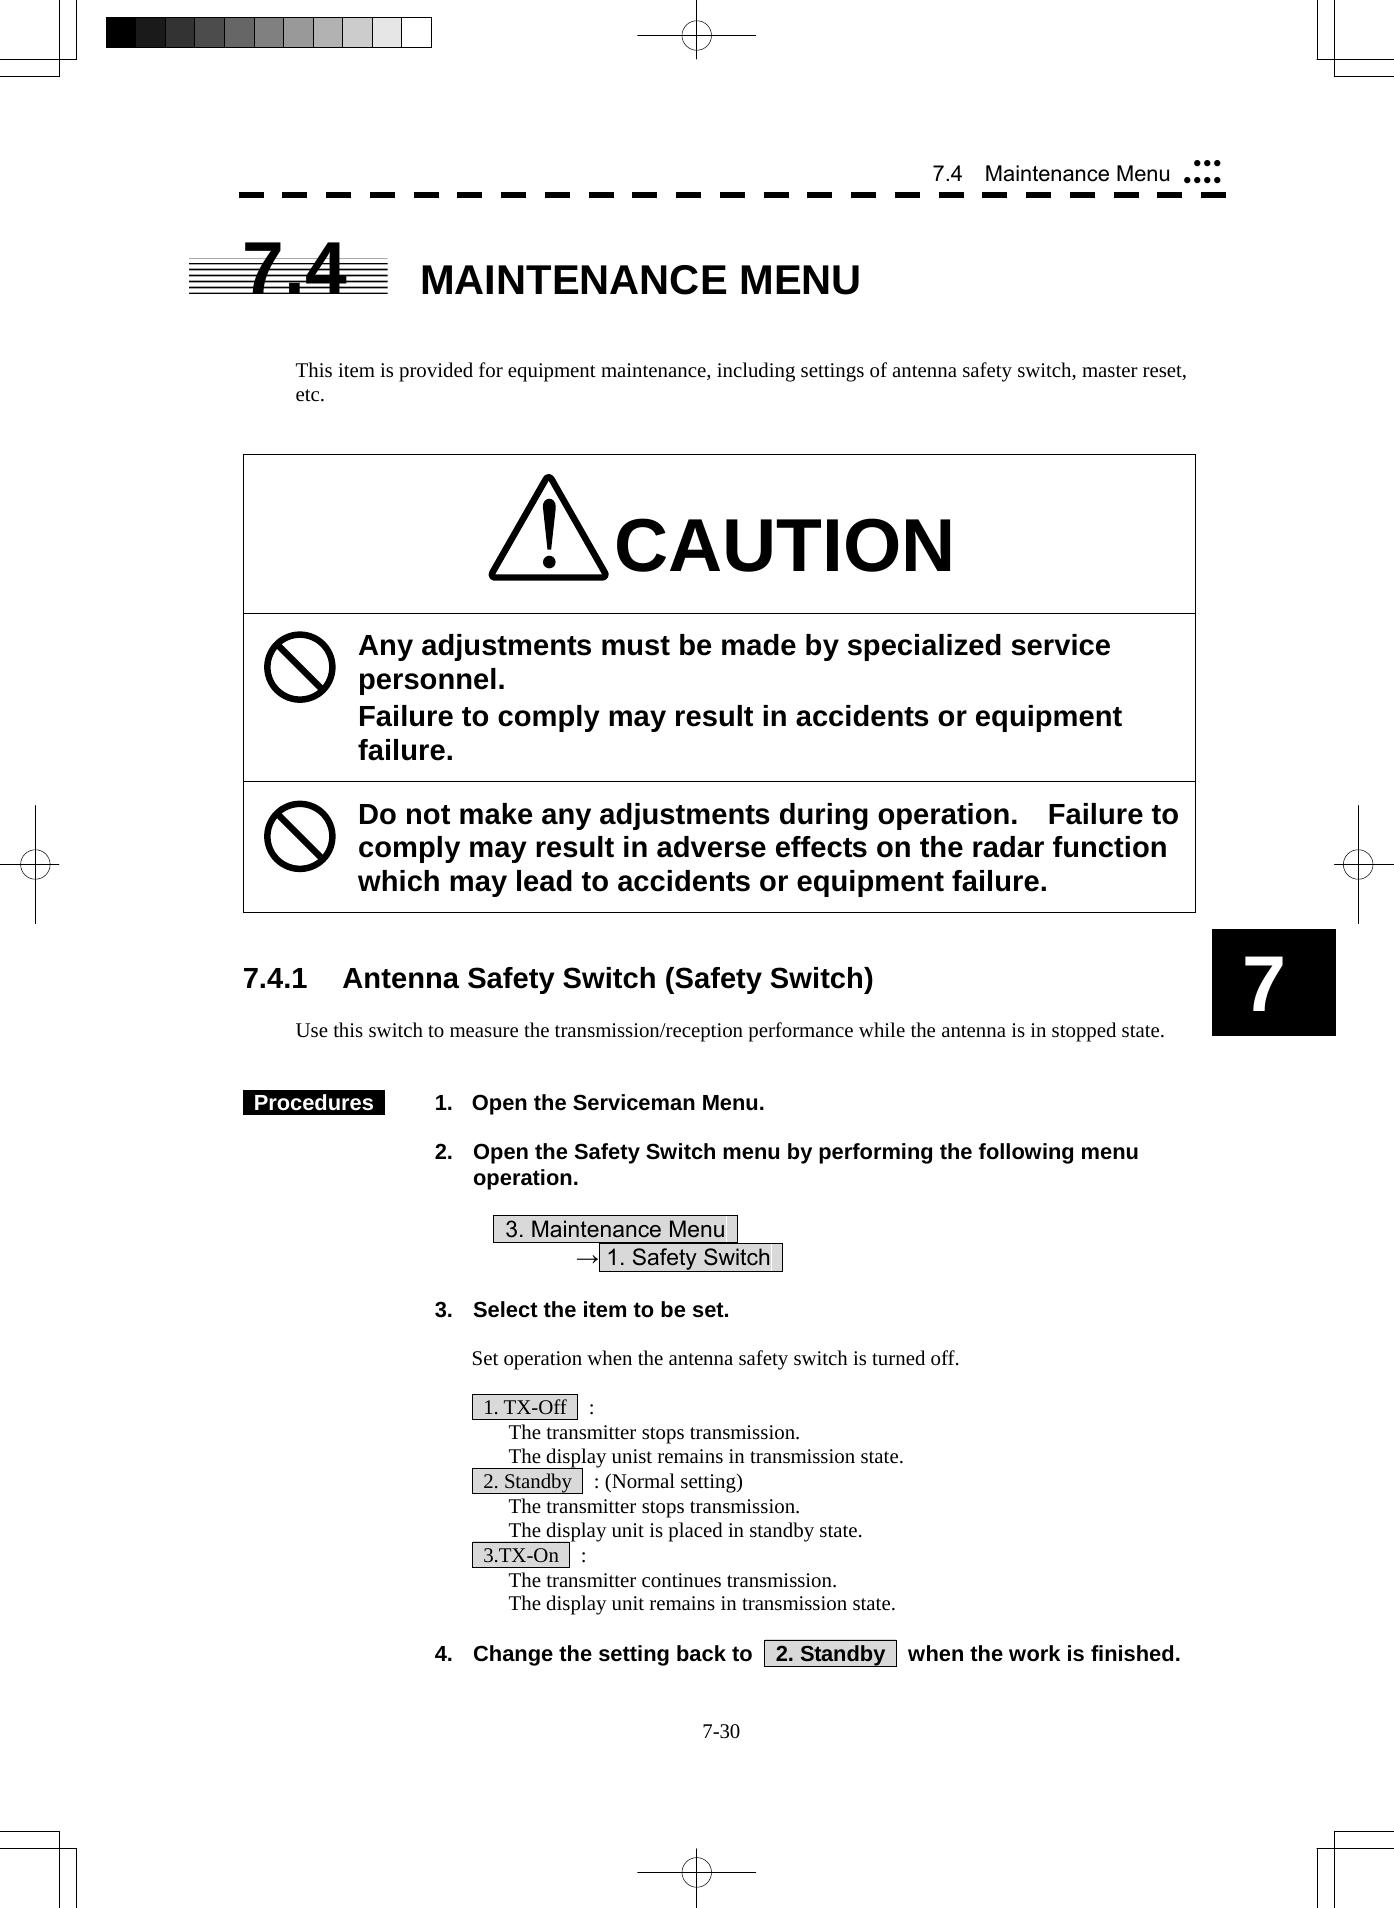  7-30 7 7.4  Maintenance Menu yyyyyyy7.4 MAINTENANCE MENU   This item is provided for equipment maintenance, including settings of antenna safety switch, master reset, etc.   CAUTION Any adjustments must be made by specialized service personnel. Failure to comply may result in accidents or equipment failure. Do not make any adjustments during operation.  Failure to comply may result in adverse effects on the radar function which may lead to accidents or equipment failure.   7.4.1  Antenna Safety Switch (Safety Switch)  Use this switch to measure the transmission/reception performance while the antenna is in stopped state.    Procedures    1.  Open the Serviceman Menu.  2.  Open the Safety Switch menu by performing the following menu operation.          3. Maintenance Menu       → 1. Safety Switch    3.  Select the item to be set.  Set operation when the antenna safety switch is turned off.   1. TX-Off  :   The transmitter stops transmission.   The display unist remains in transmission state.   2. Standby    : (Normal setting)   The transmitter stops transmission.   The display unit is placed in standby state.  3.TX-On  :   The transmitter continues transmission.   The display unit remains in transmission state.  4.  Change the setting back to    2. Standby    when the work is finished. 